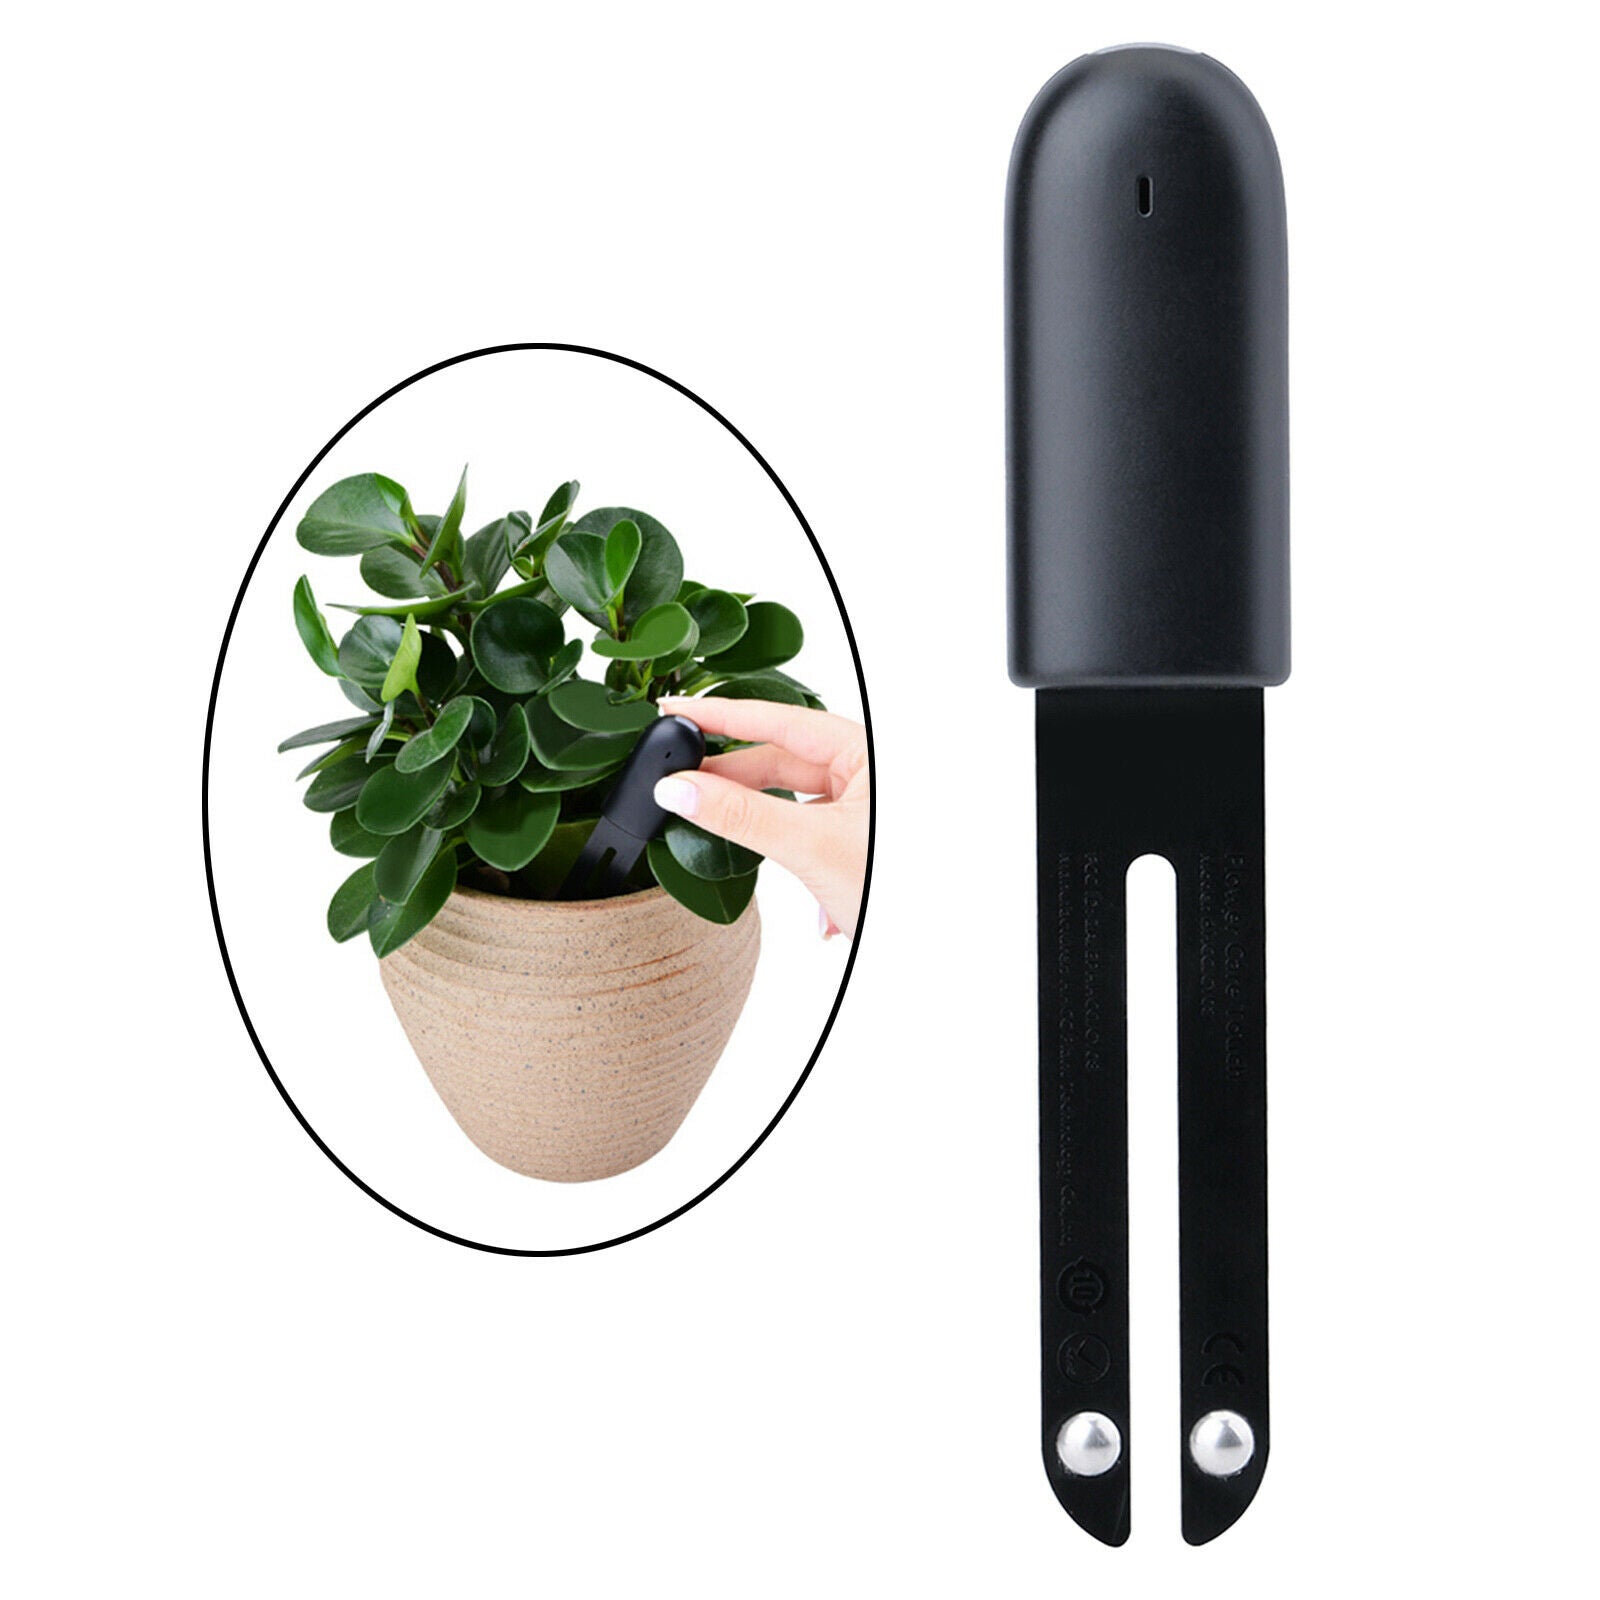 Smart Plant Monitor Flower Care Soil Test Kit Bluetooth Monitors for Home